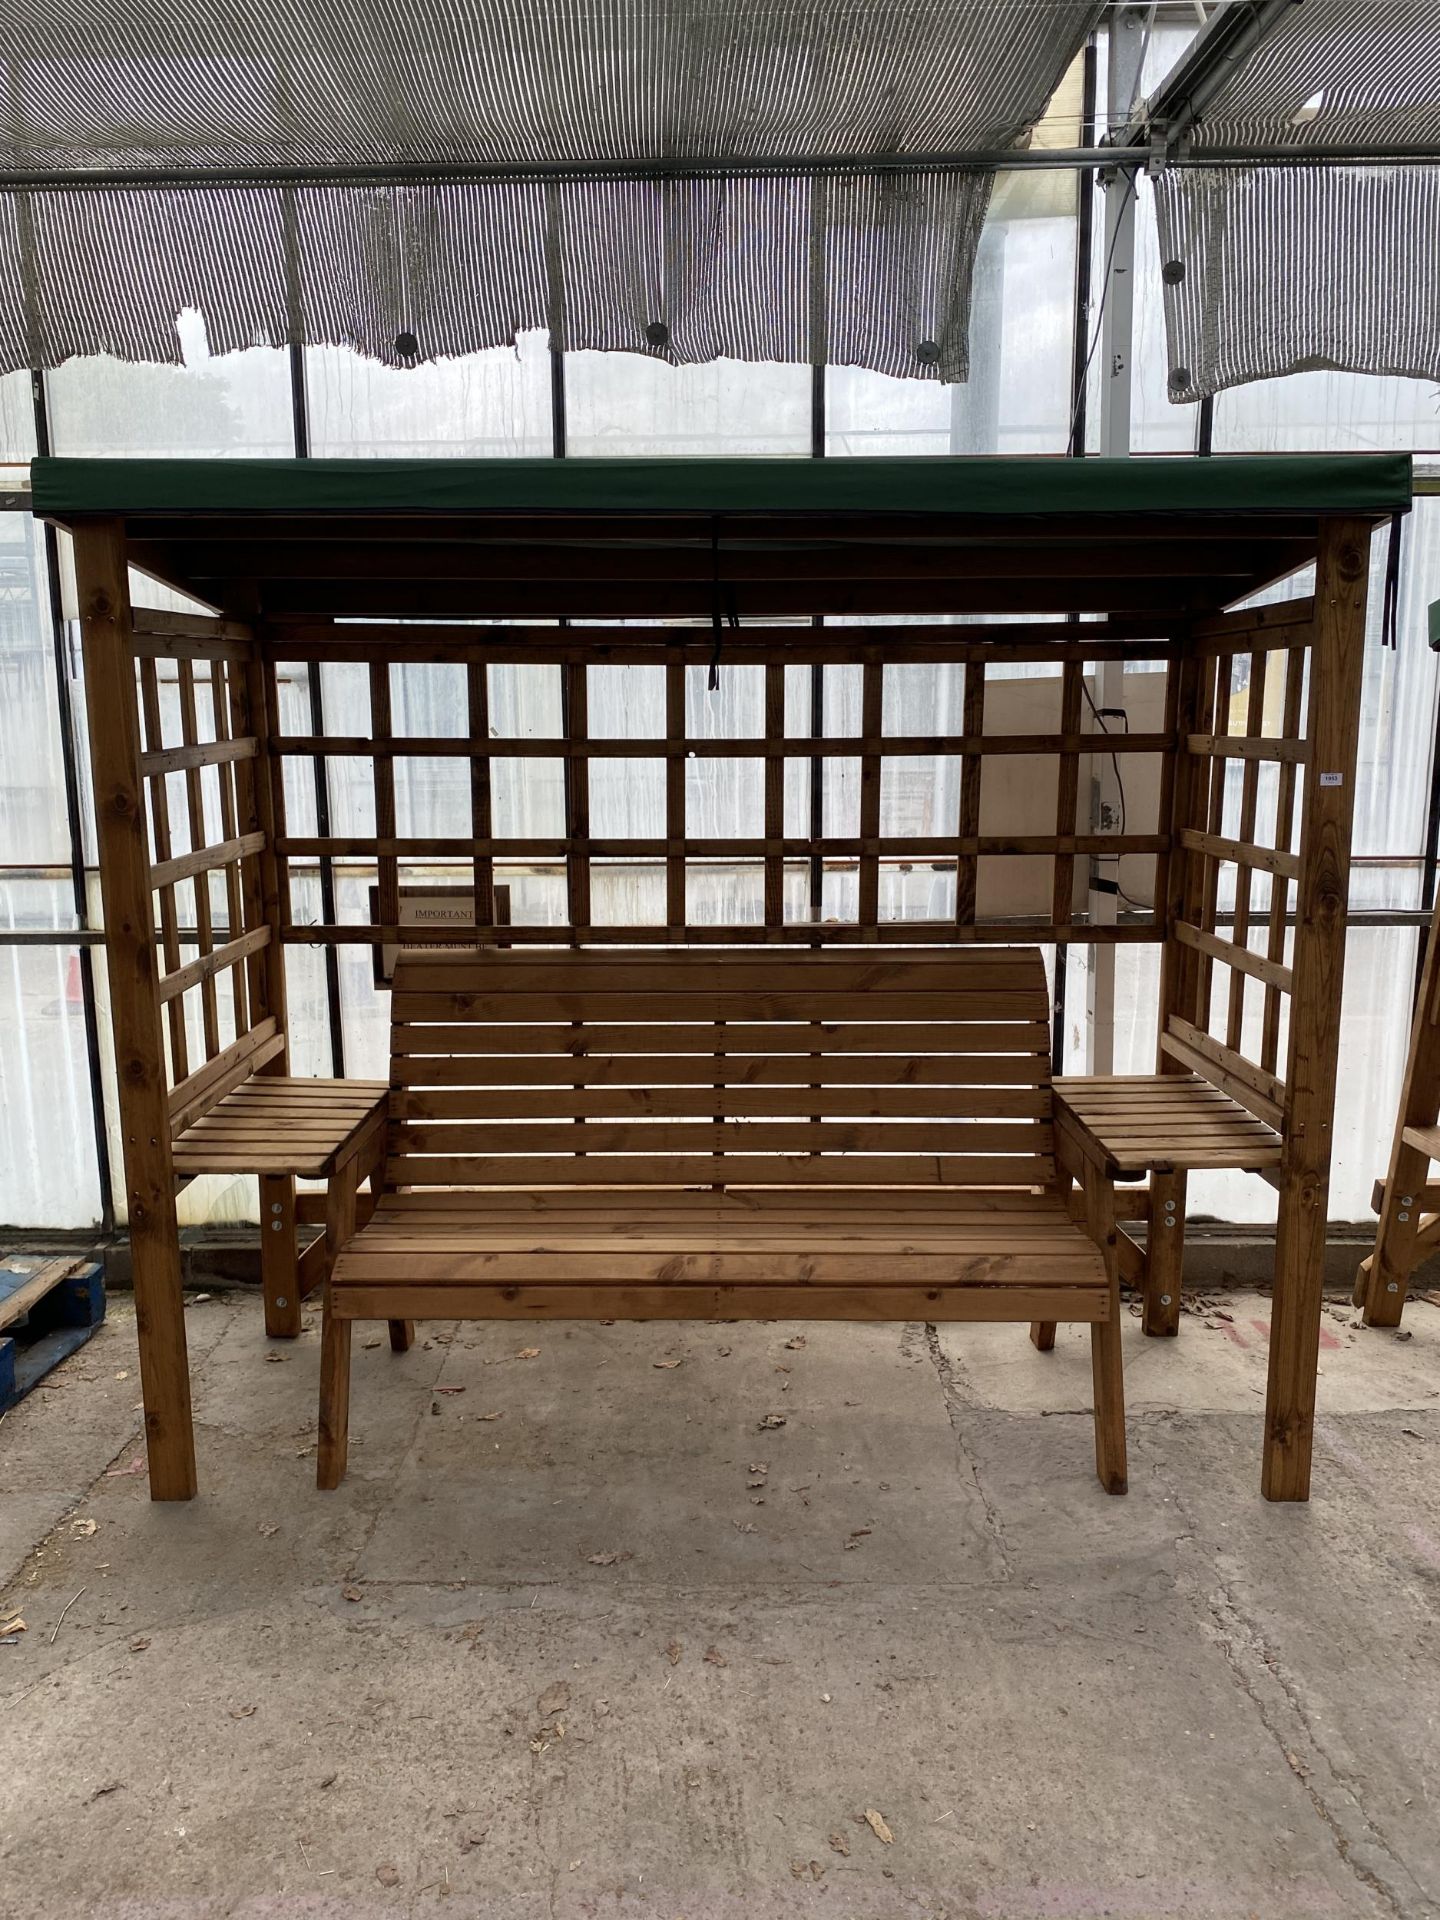 AN AS NEW EX DISPLAY CHARLES TAYLOR THREE SEATER GARDEN BENCH WITH CANOPY AND ARMREST SIDE TABLES *